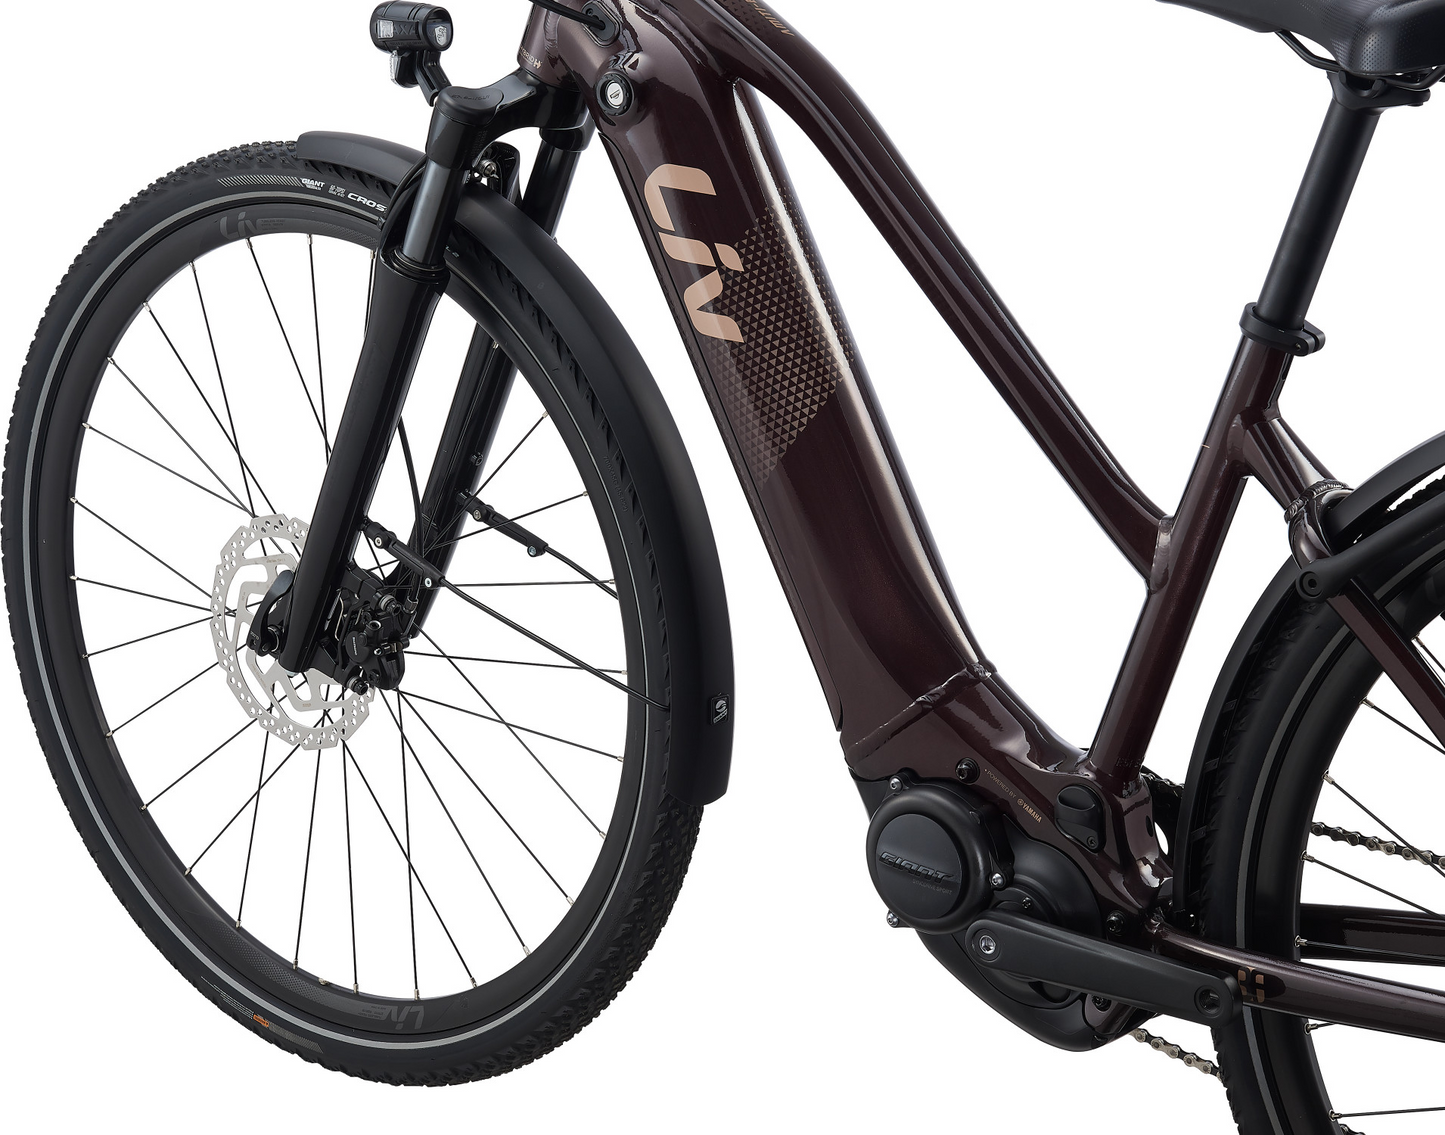 A powerful LIV - AMITI-E+ 2 electric bike with a long-lasting battery is shown against a white background.